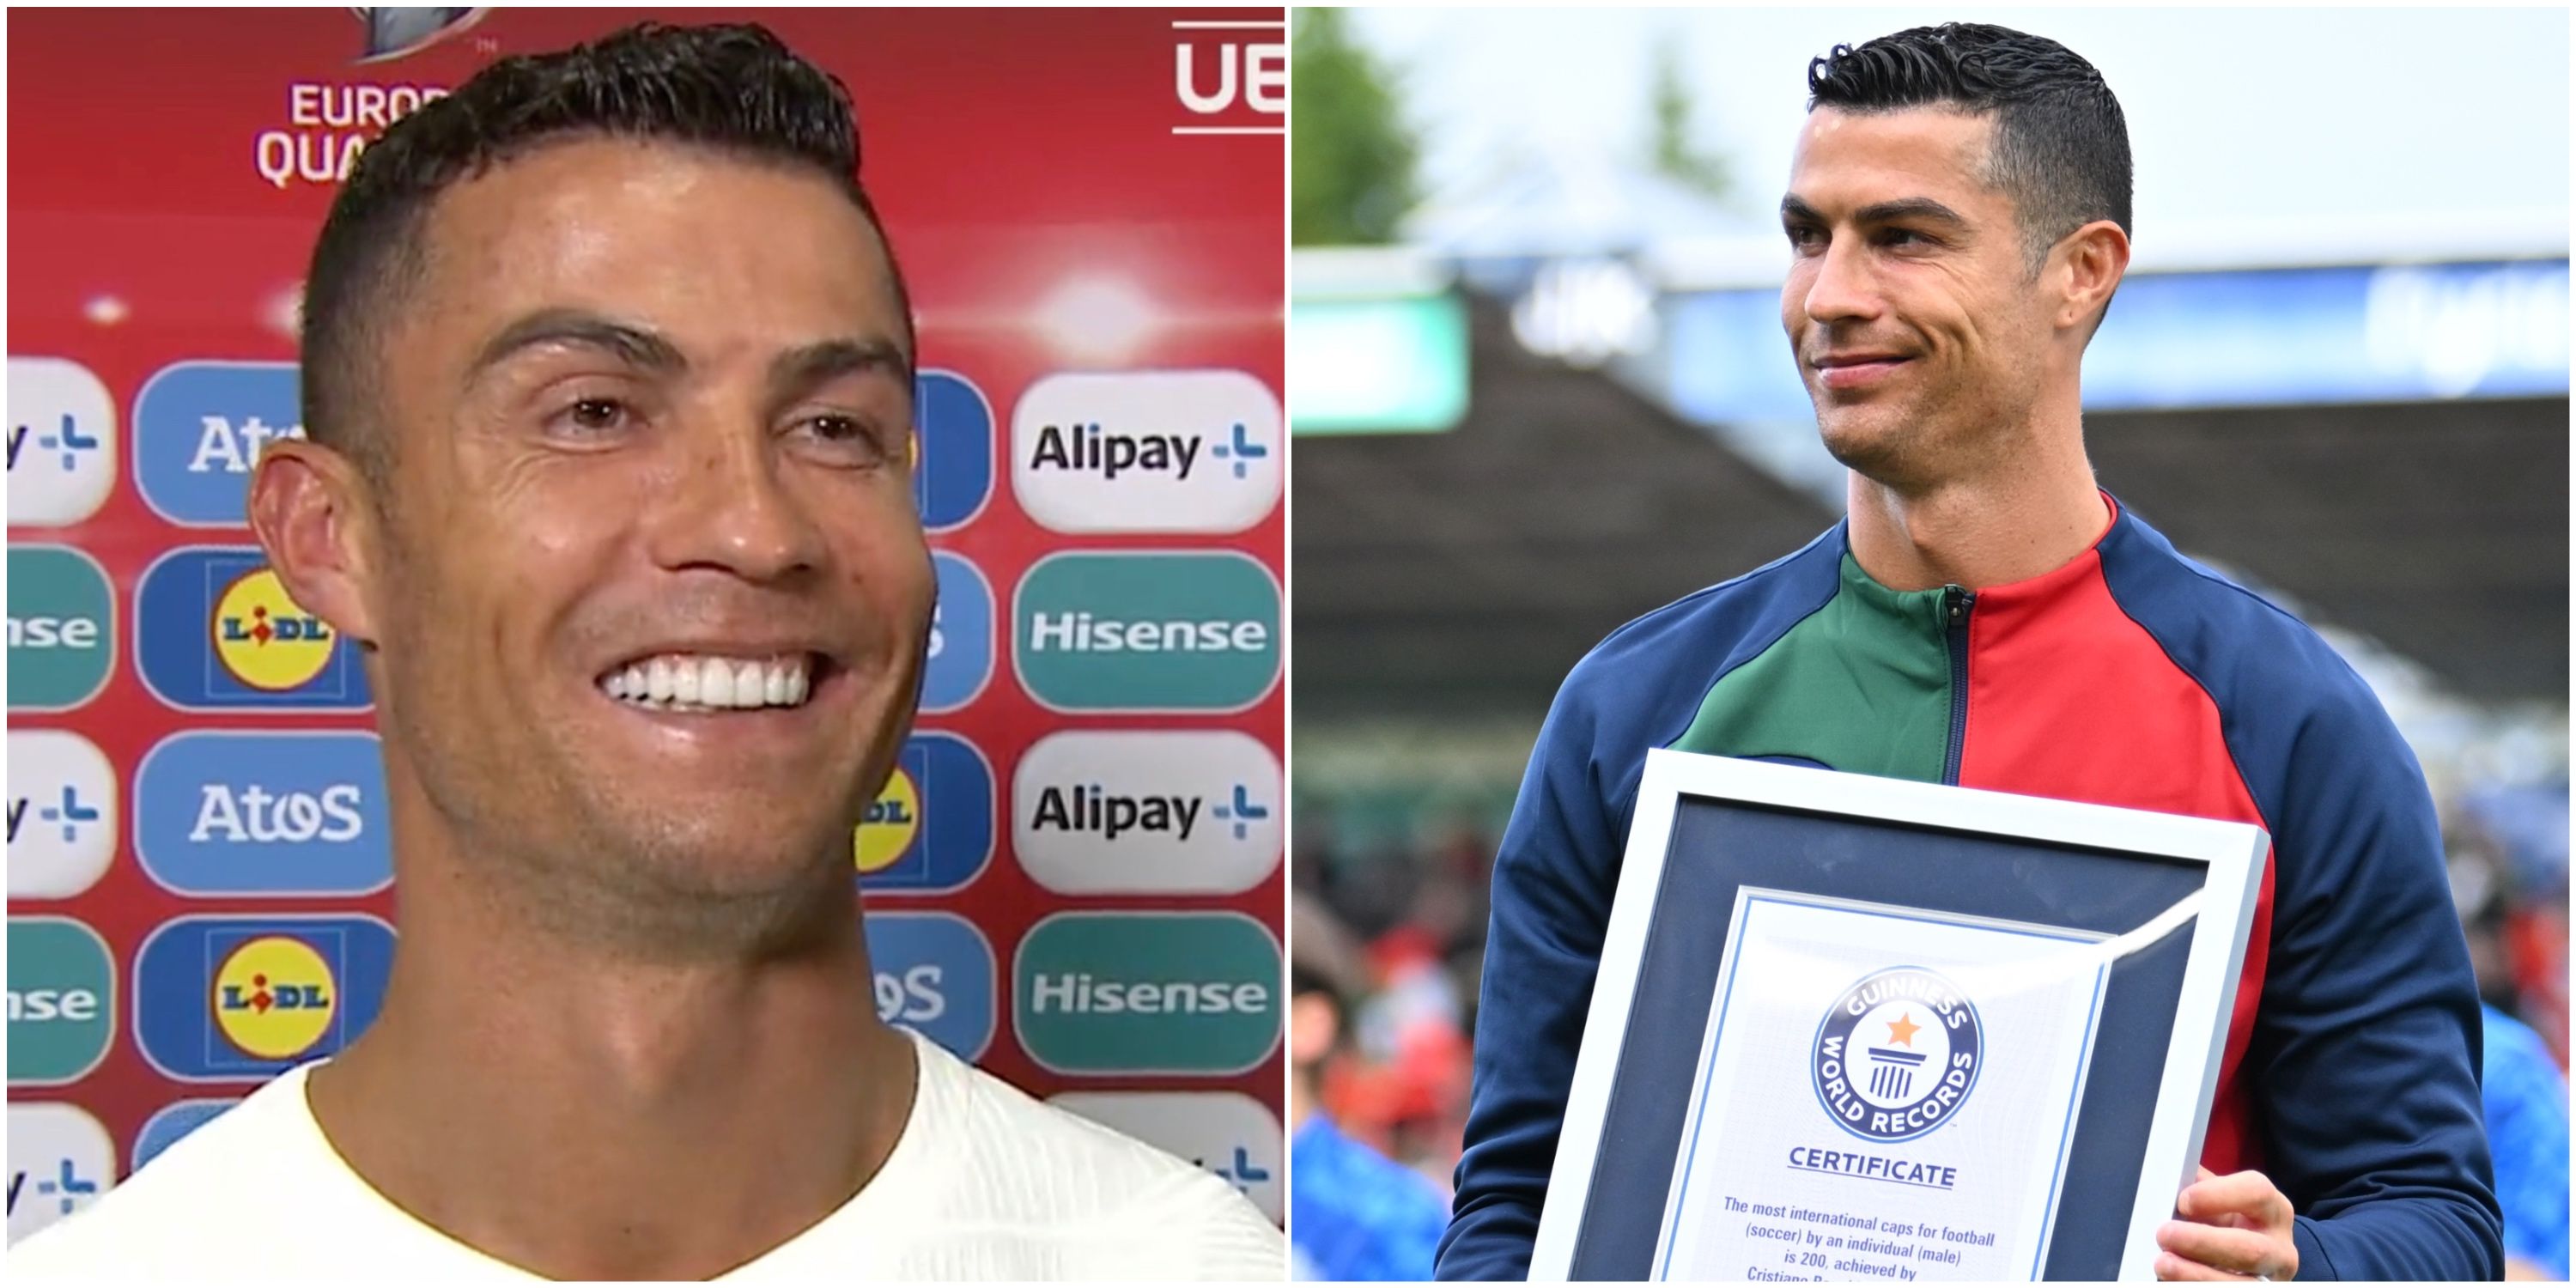 Cristiano Ronaldo’s interview after achieving new Guinness World Record is brilliant